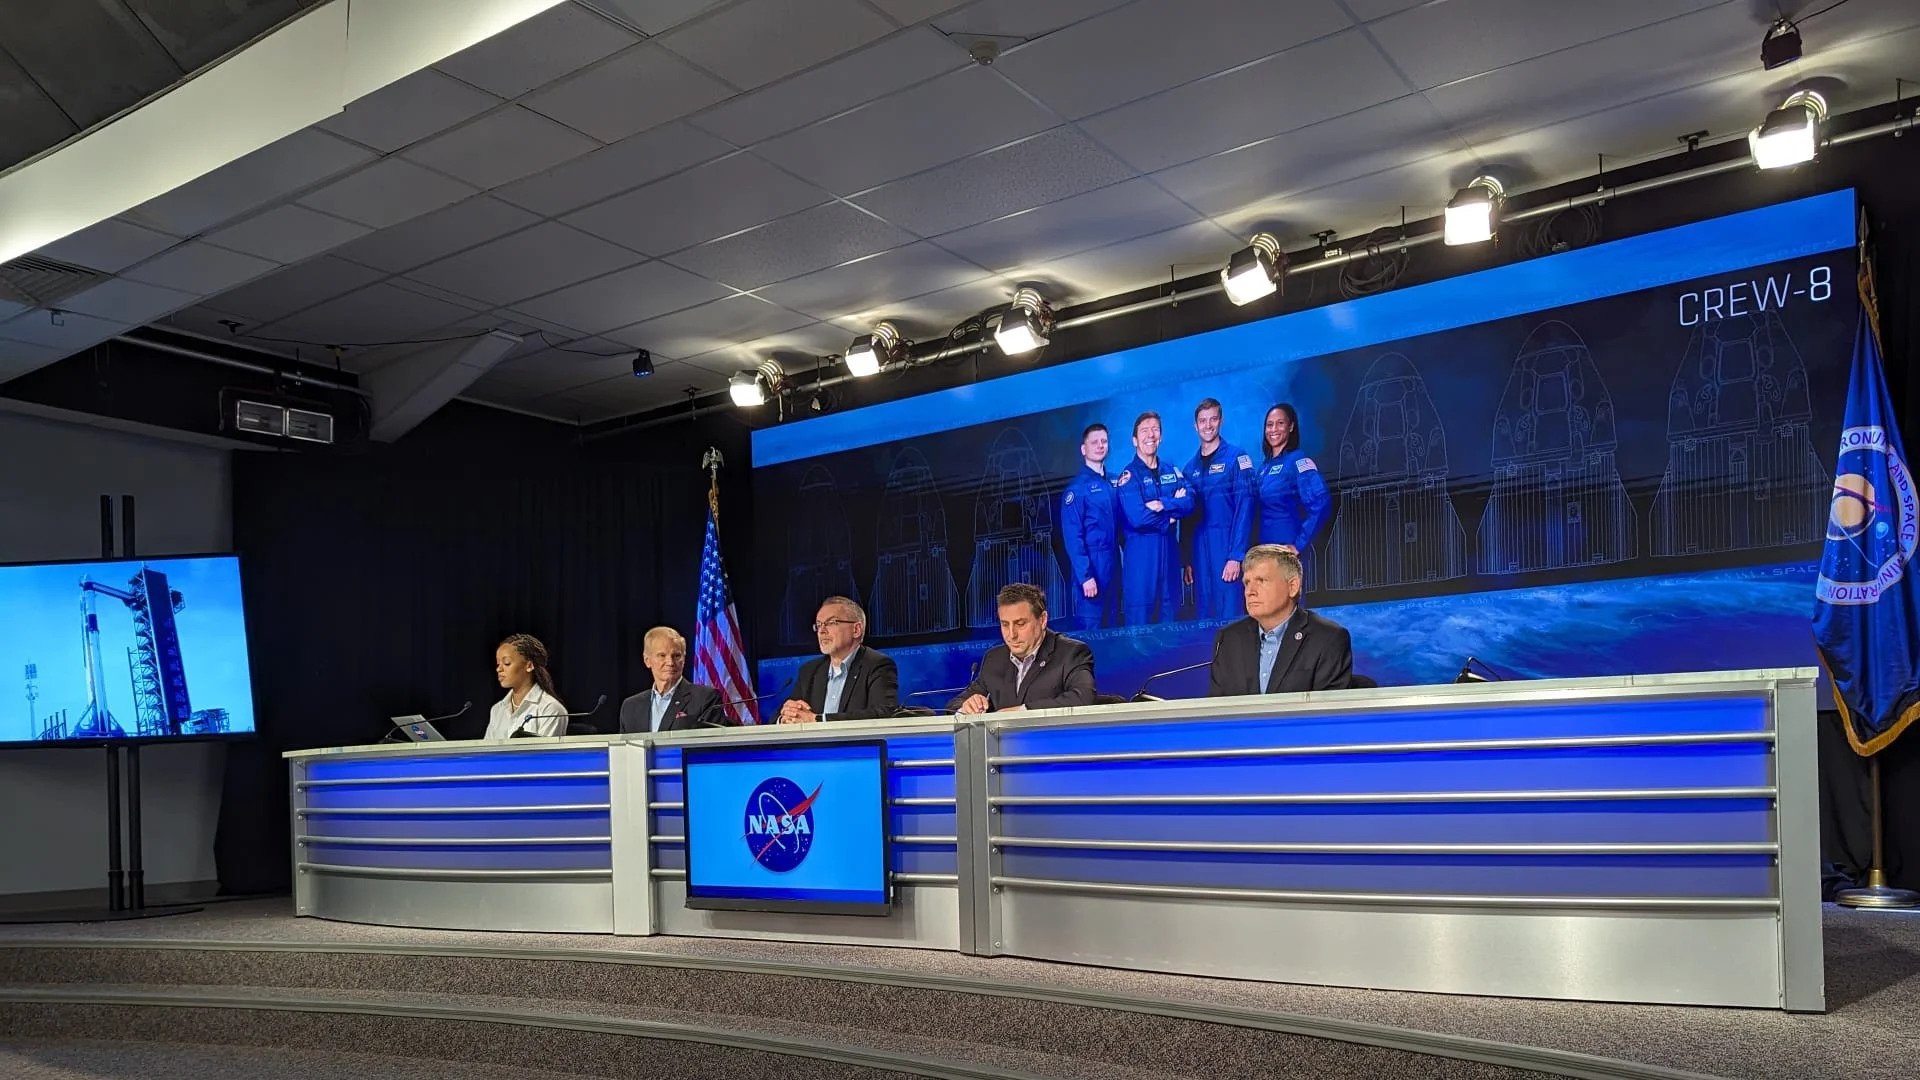  People in suits sit at a desk in front of a poster of four astronauts in flight suits and the text "crew-8". 